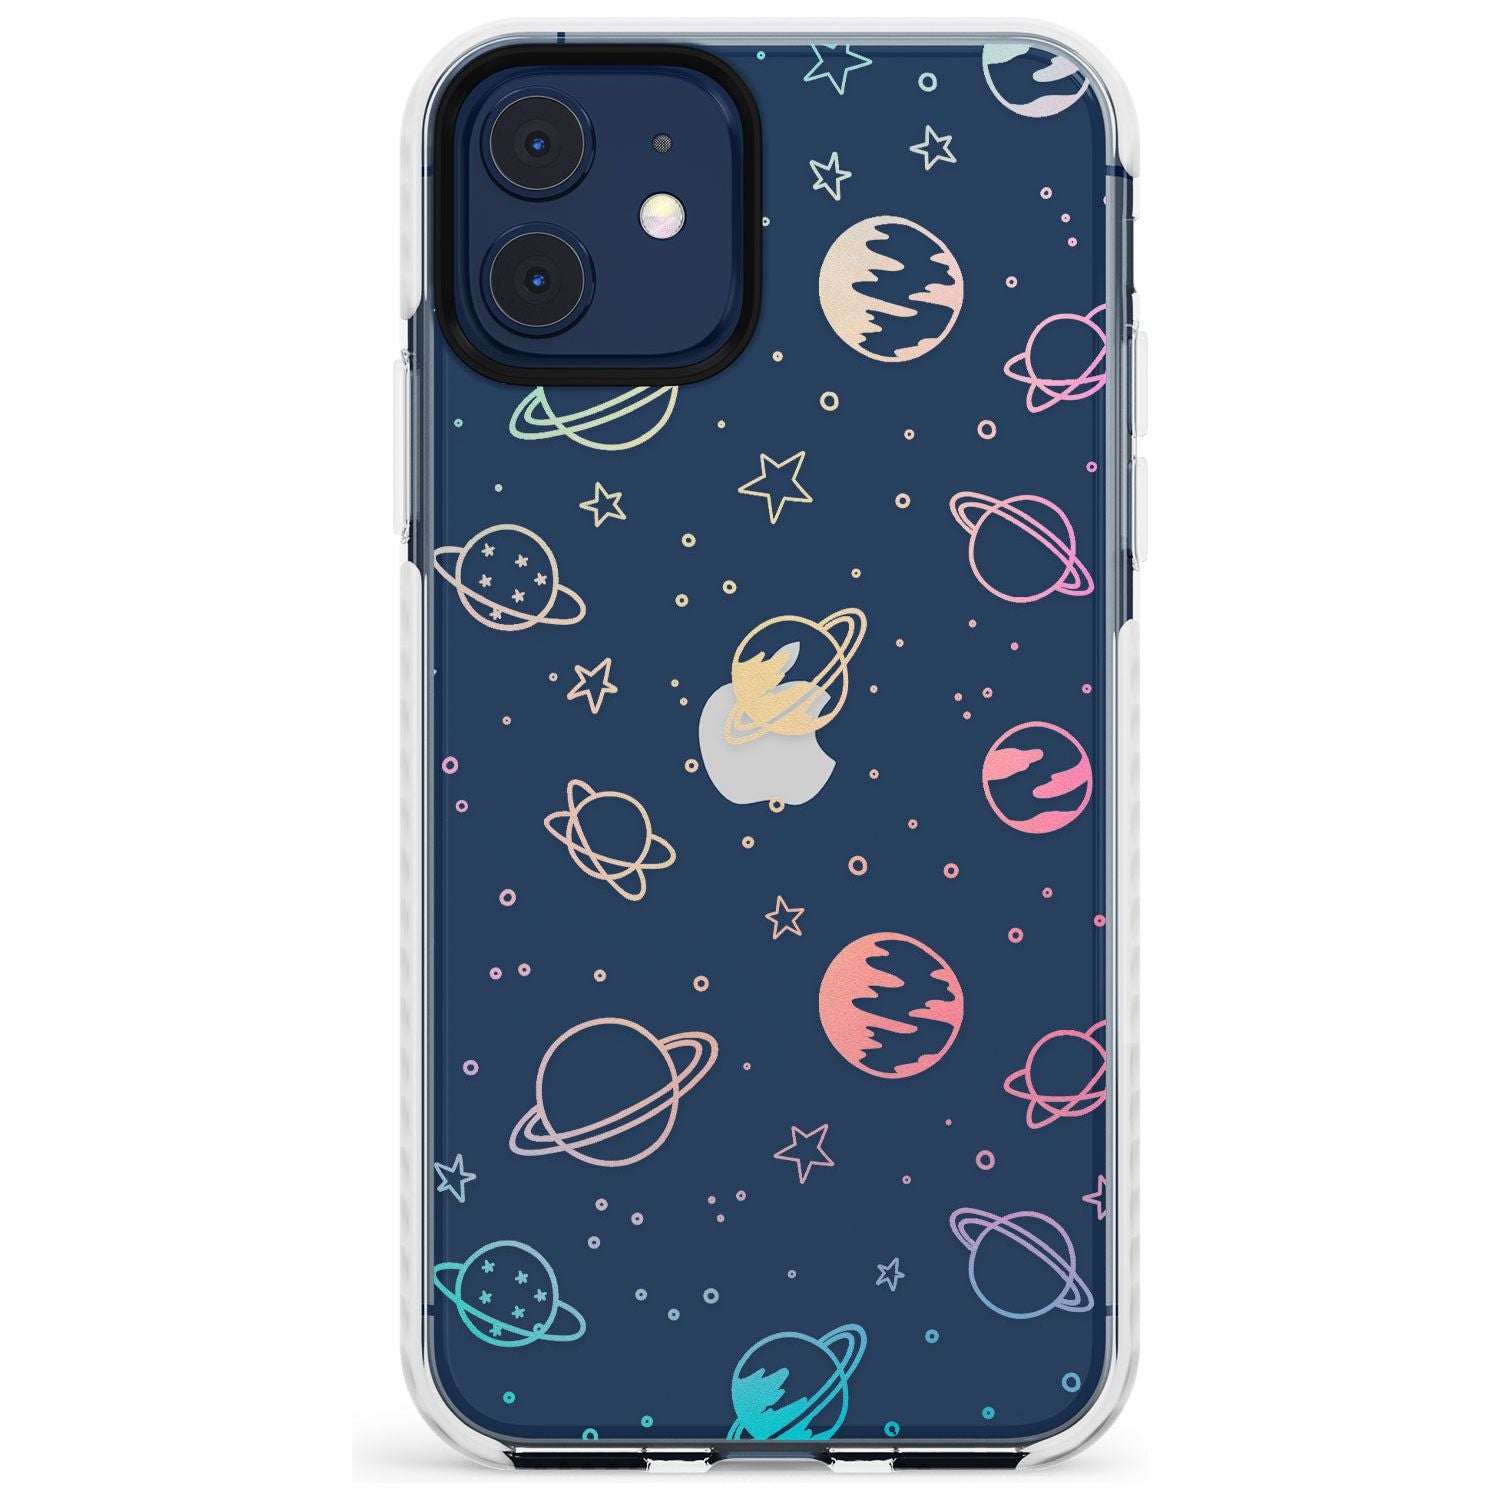 Outer Space Outlines: Pastels on Clear Slim TPU Phone Case for iPhone 11